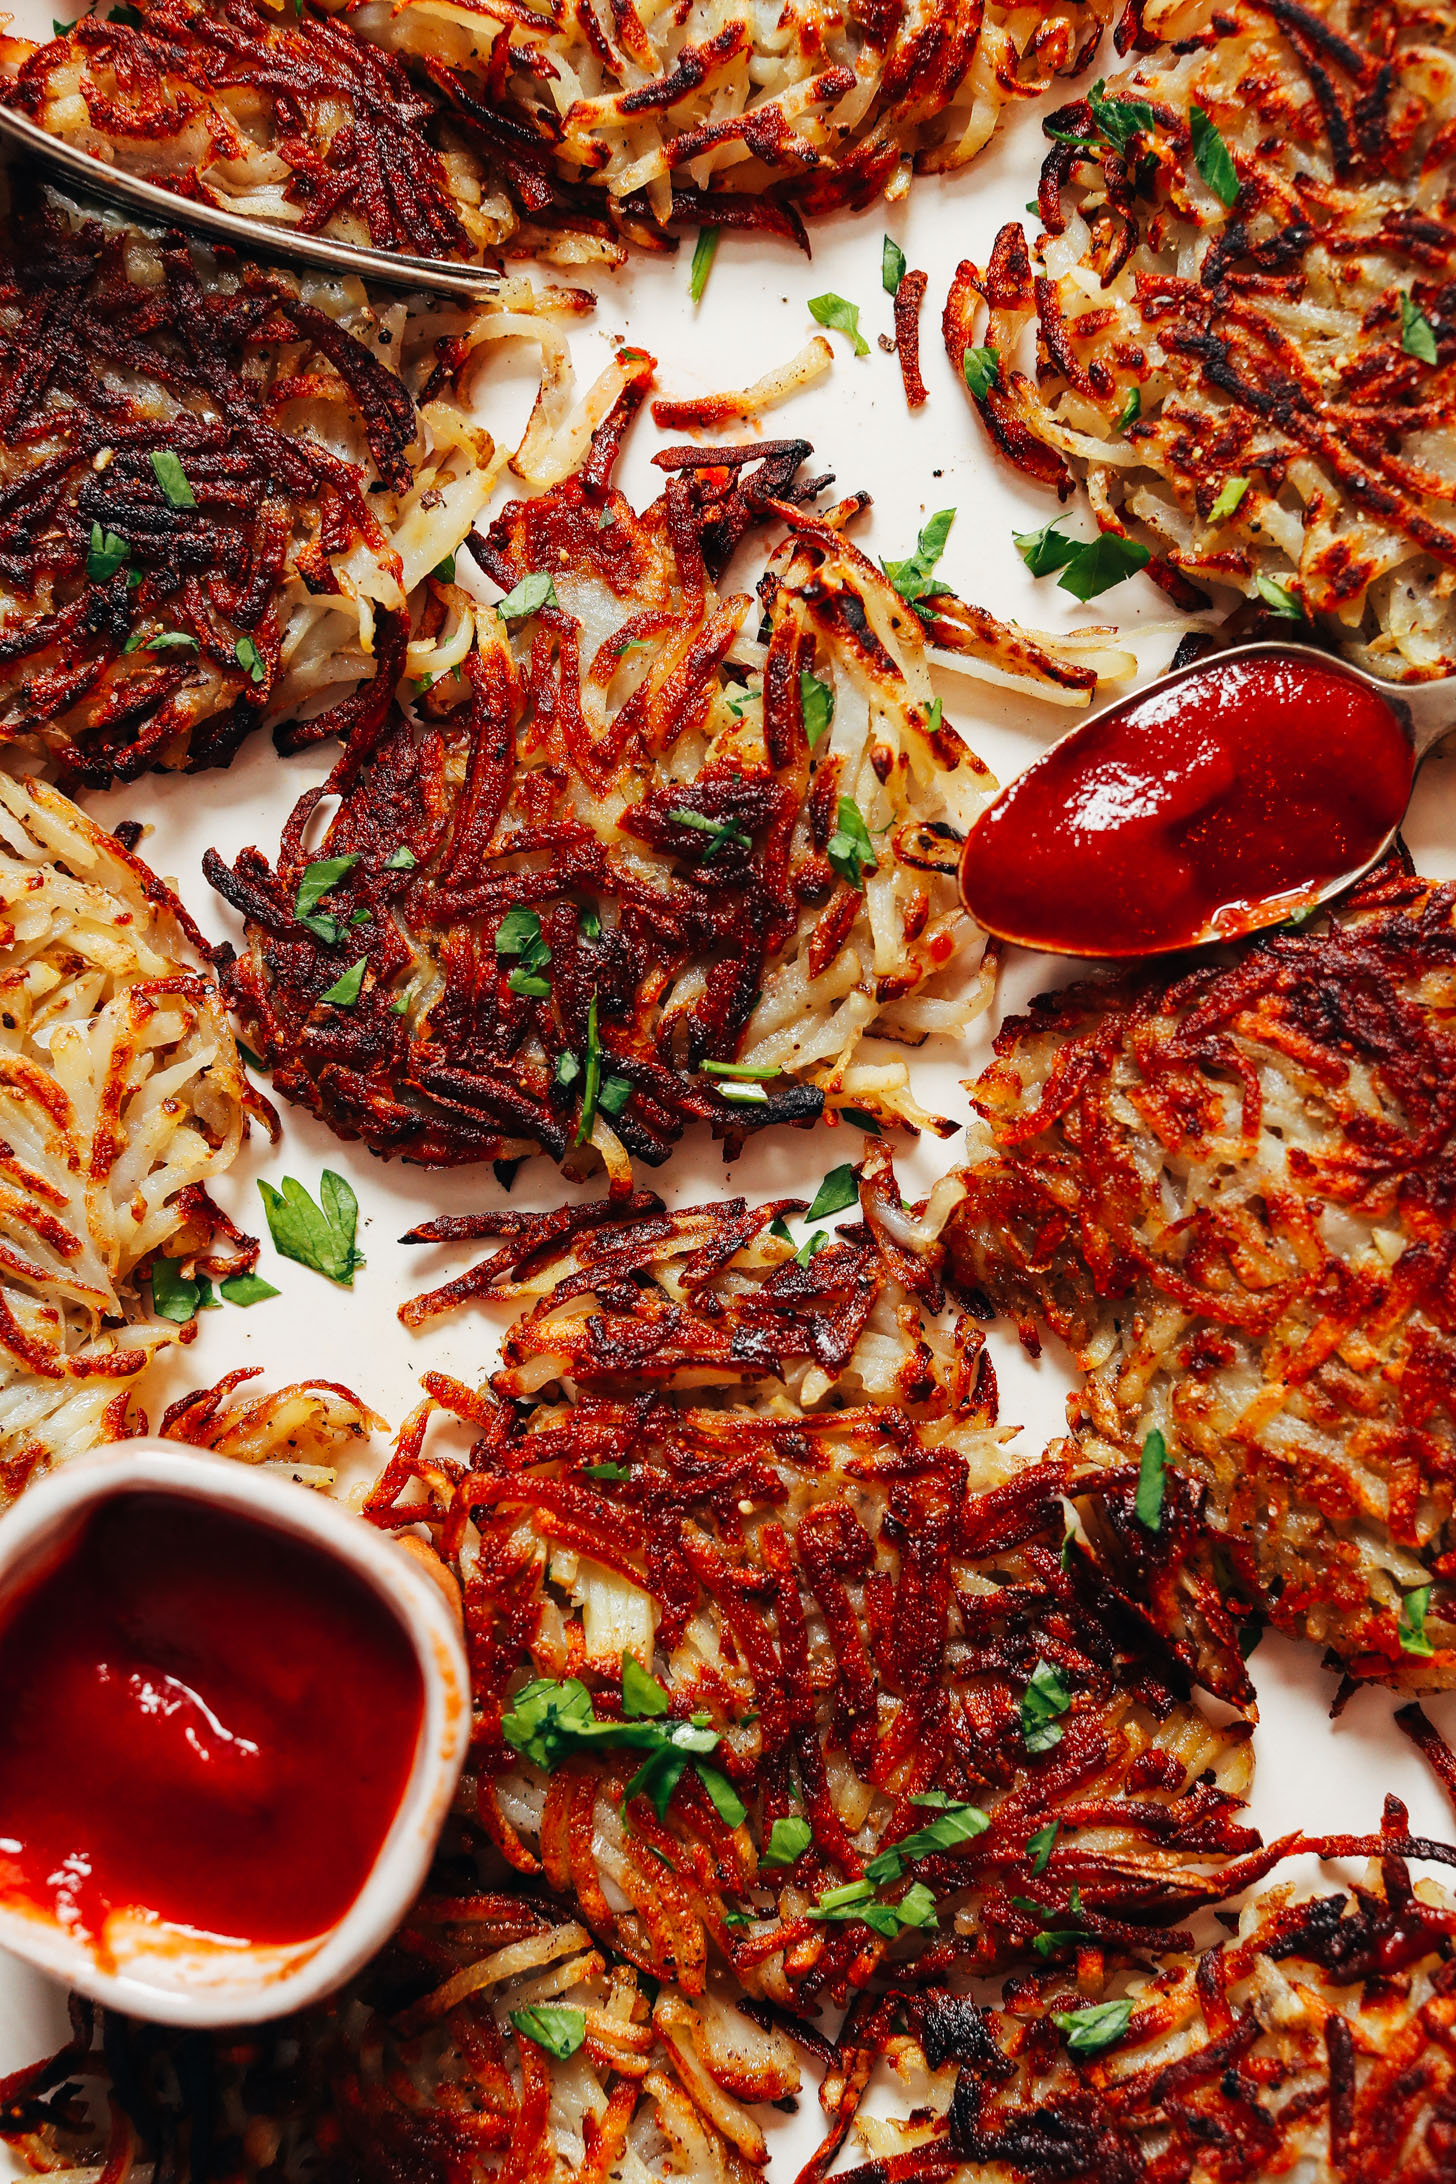 Crispy homemade hash browns topped with parsley and next to ketchup